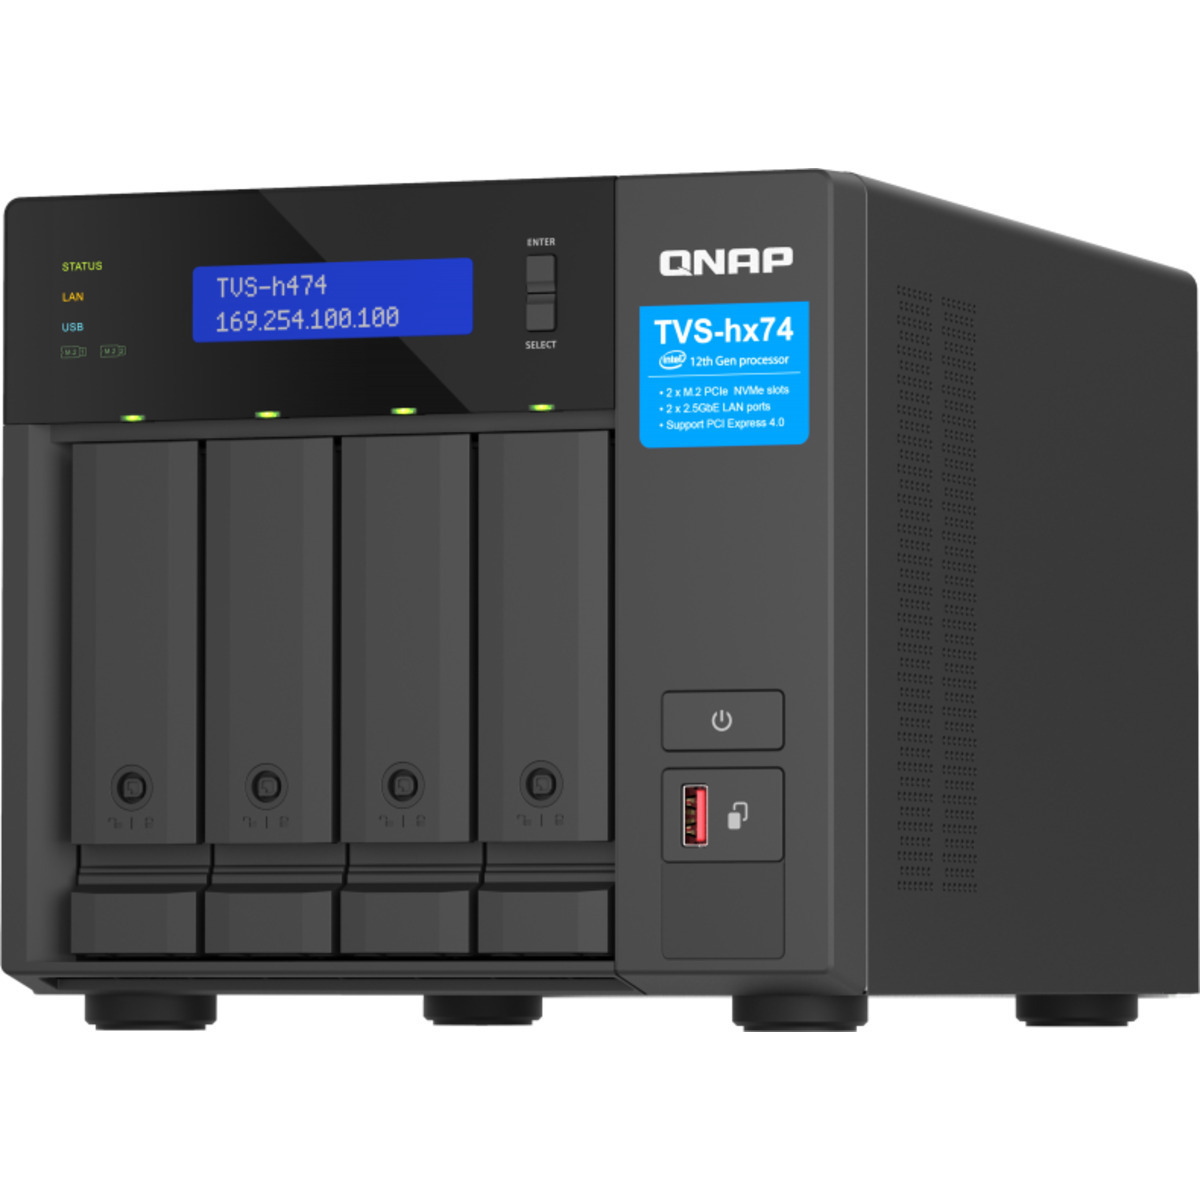 buy $2474 QNAP TVS-h474 Pentium Gold 24tb Desktop NAS - Network Attached Storage Device 4x6000gb Seagate IronWolf Pro ST6000NT001 3.5 7200rpm SATA 6Gb/s HDD NAS Class Drives Installed - Burn-In Tested - FREE RAM UPGRADE - nas headquarters buy network attached storage server device das new raid-5 free shipping simply usa TVS-h474 Pentium Gold